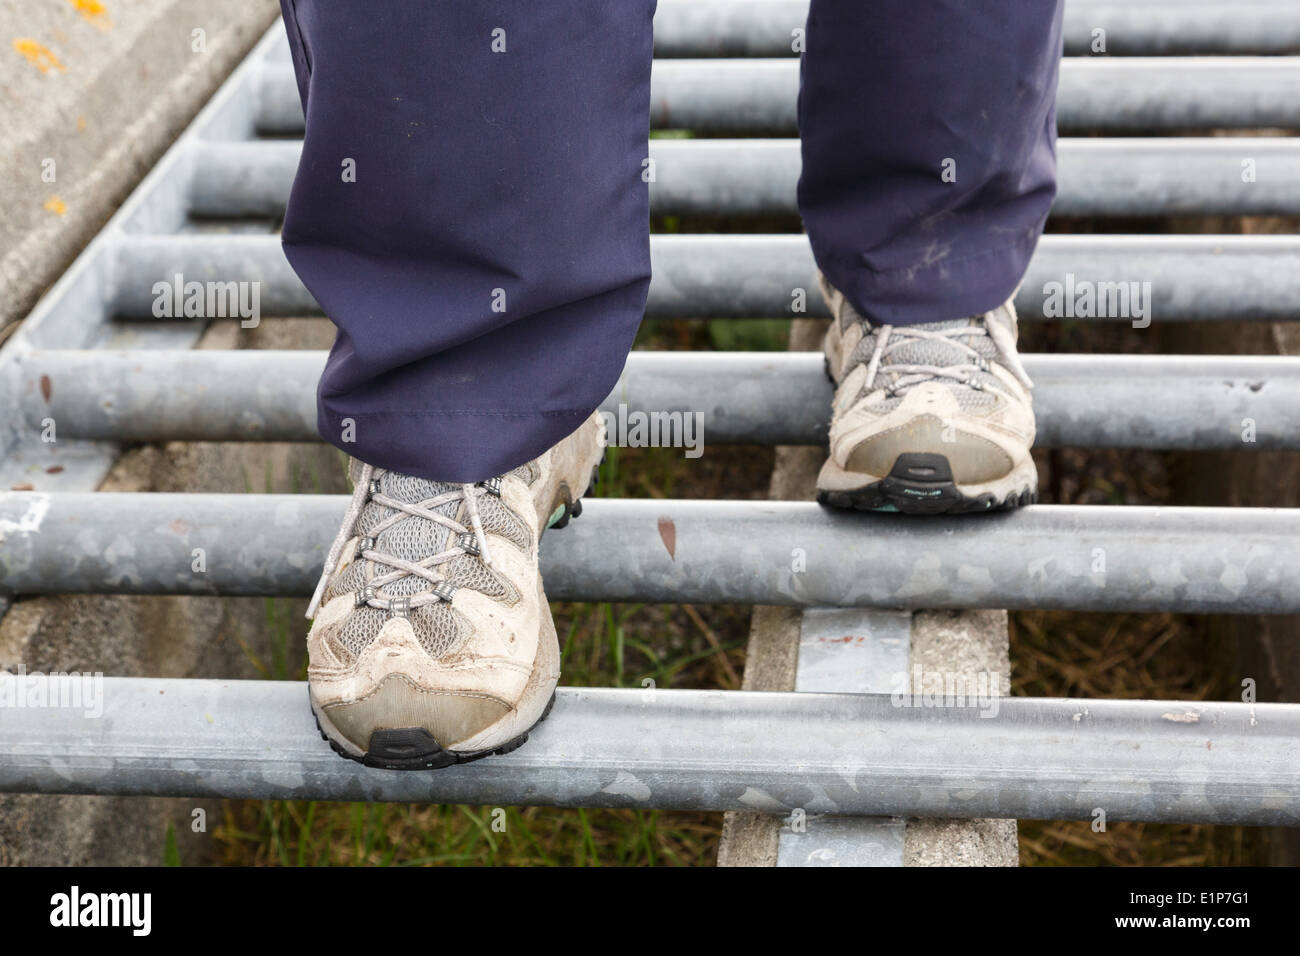 Woman walker wearing walking shoes stepping cautiously and carefully over bars on a cattle grid on a country track. England, UK, Britain. Stock Photo